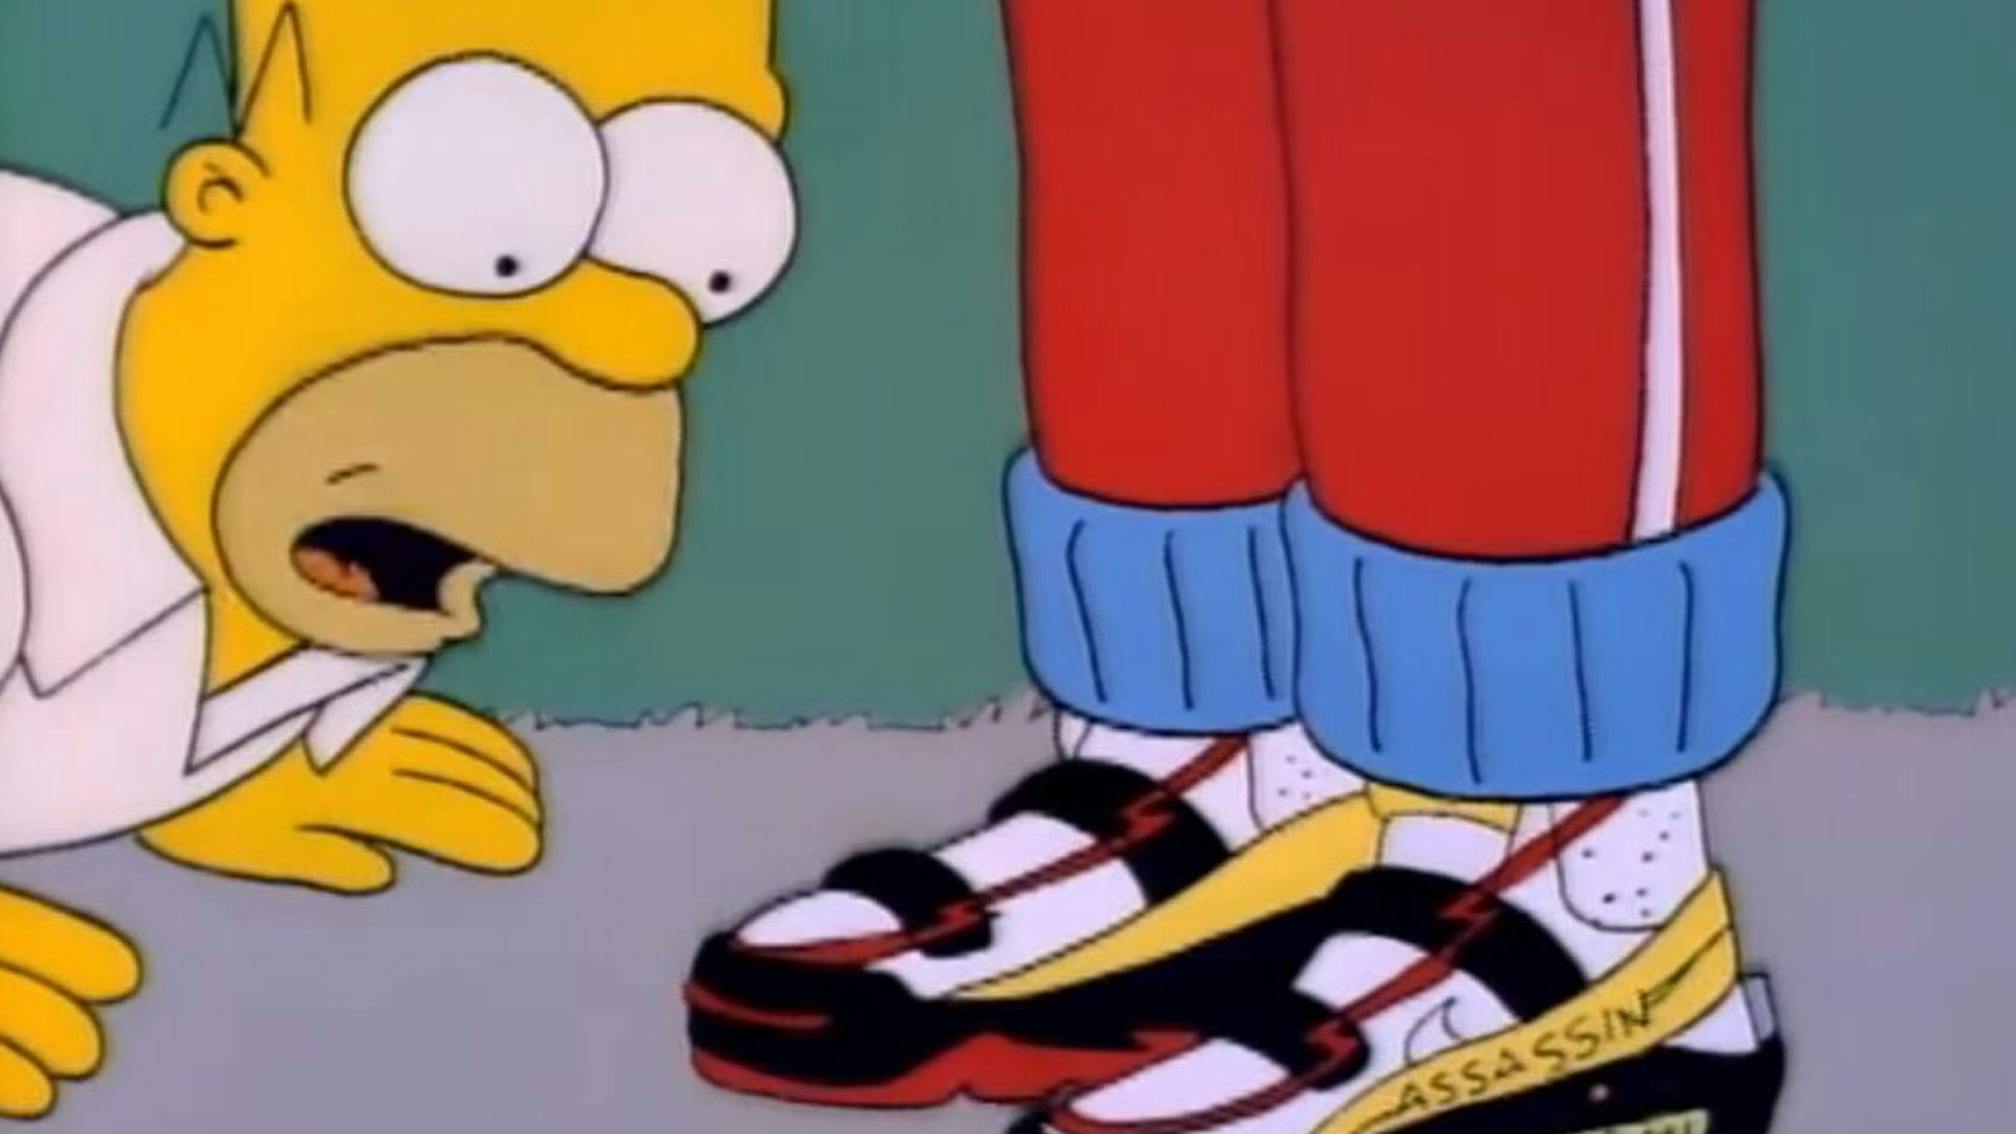 Ned Flanders from The Simpsons is getting his own adidas sneakers